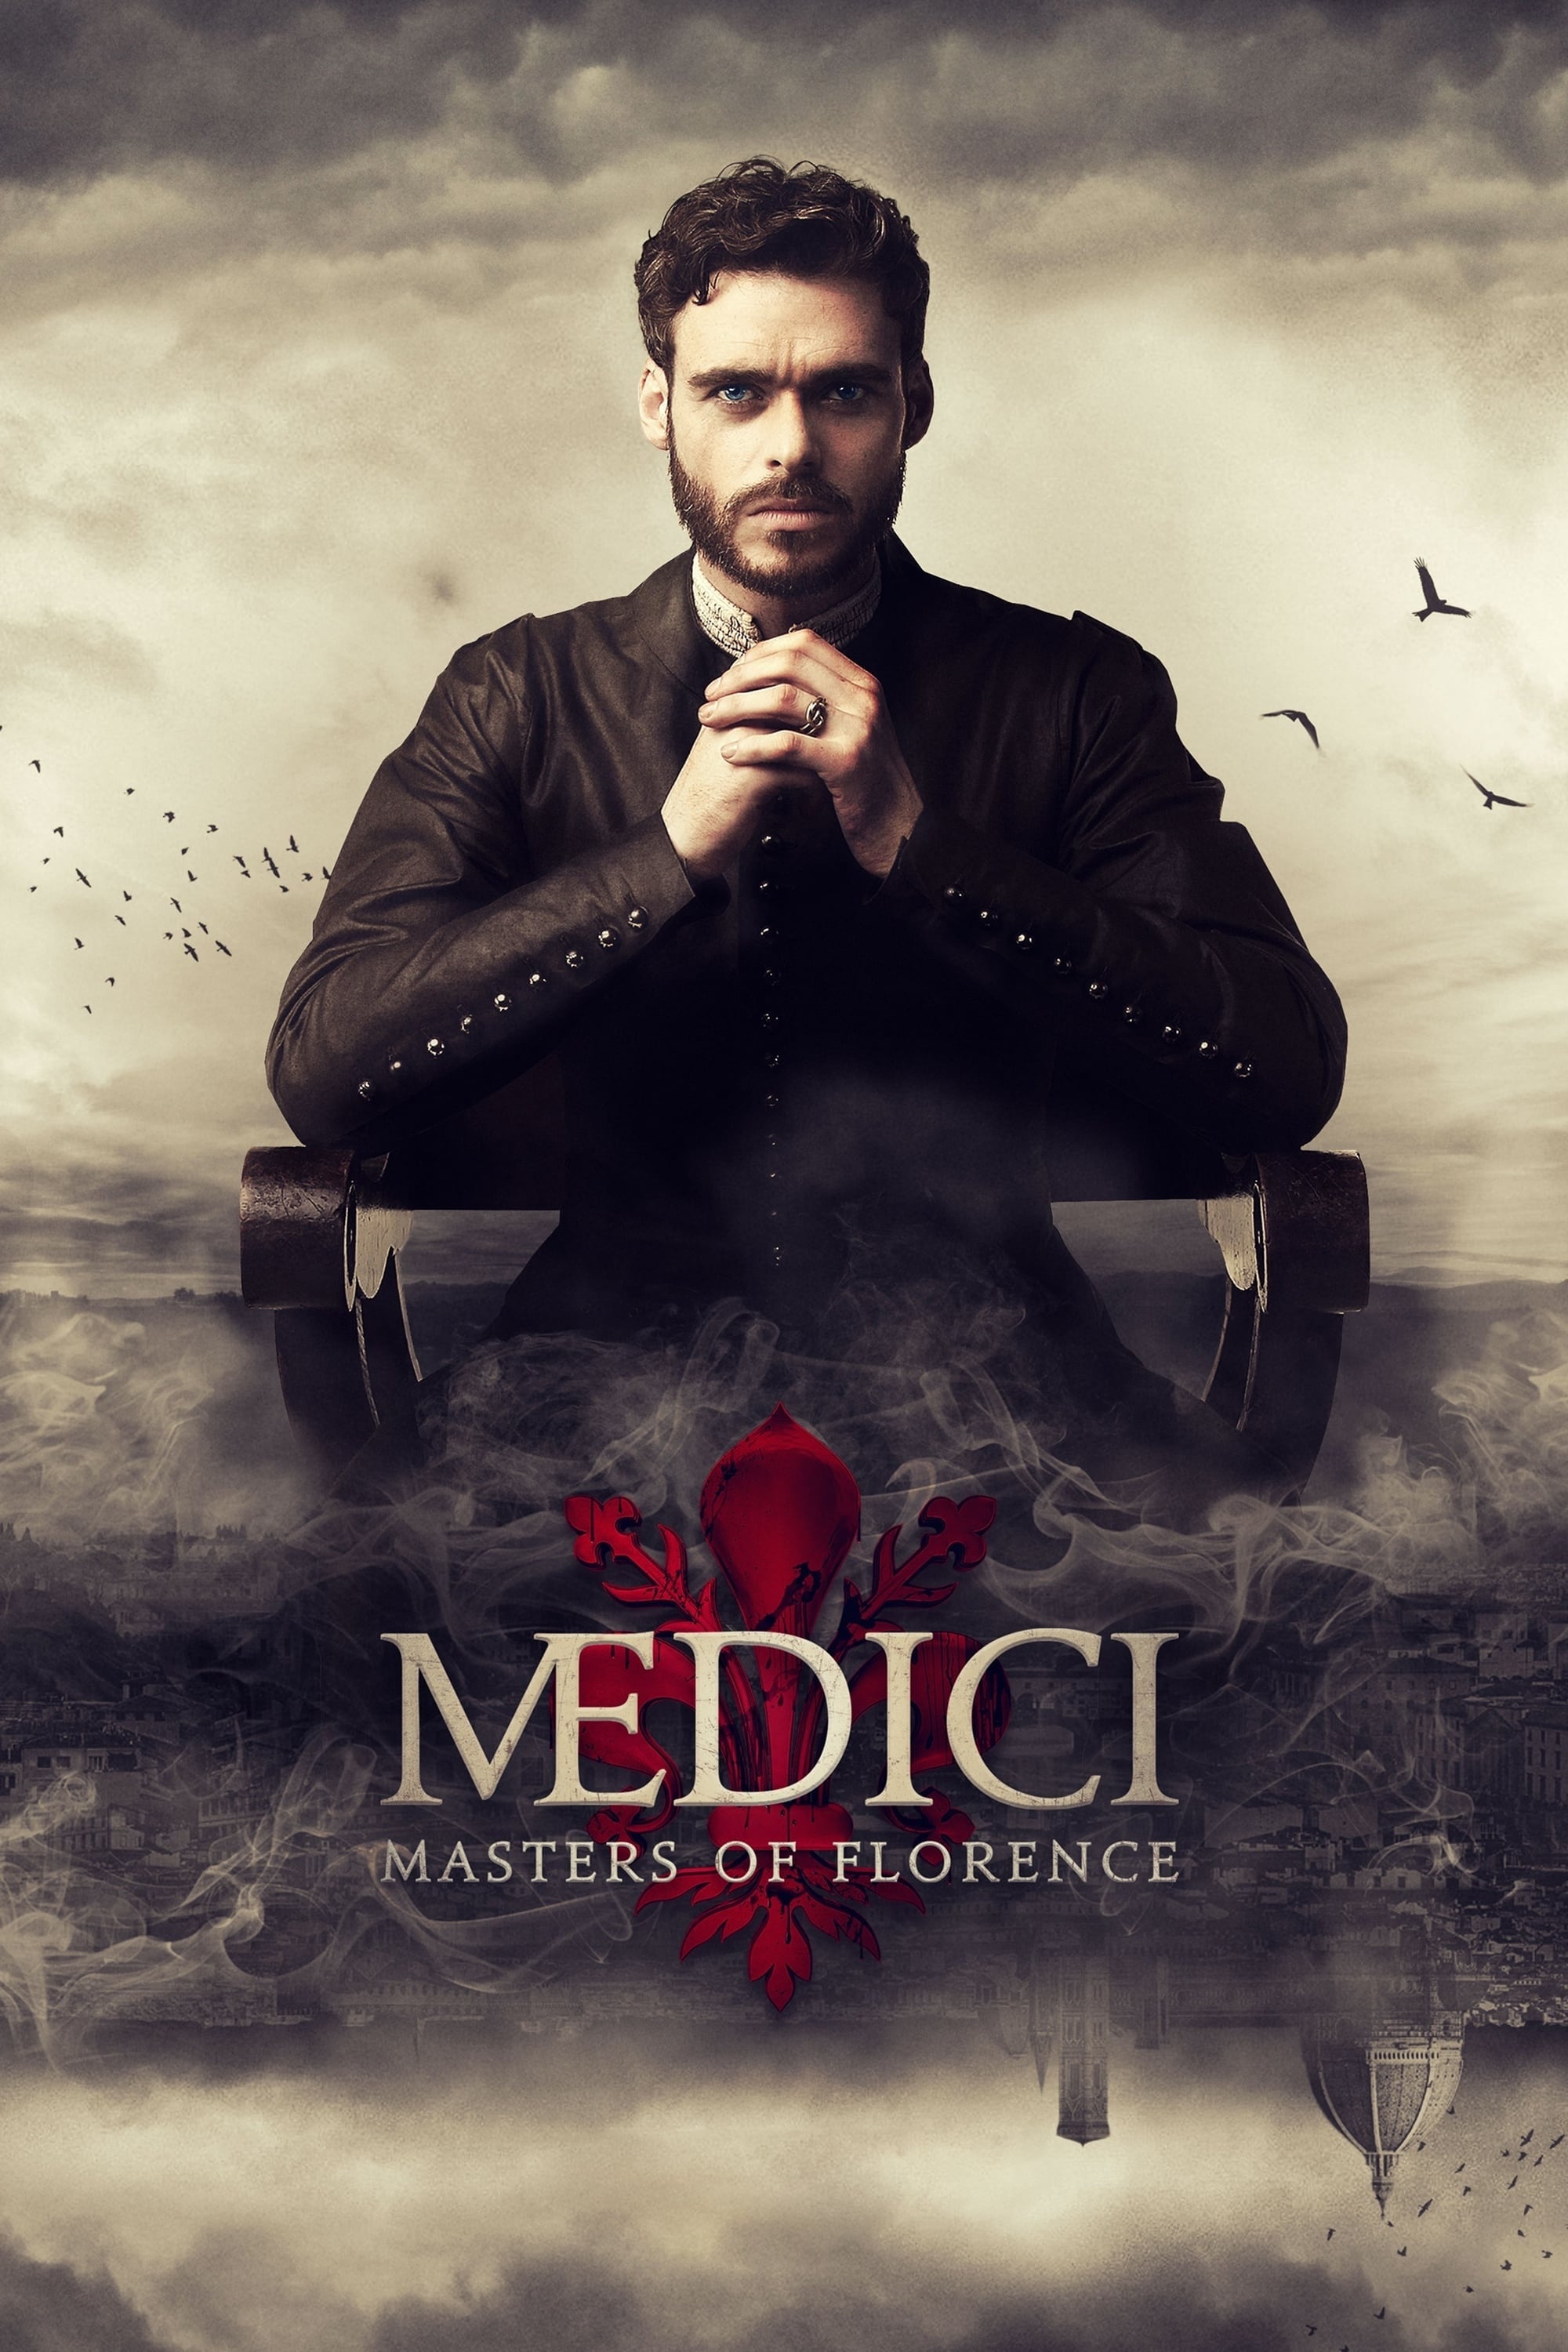 Medici, Masters of Florence, Watch online, Drama show, 2000x3000 HD Handy